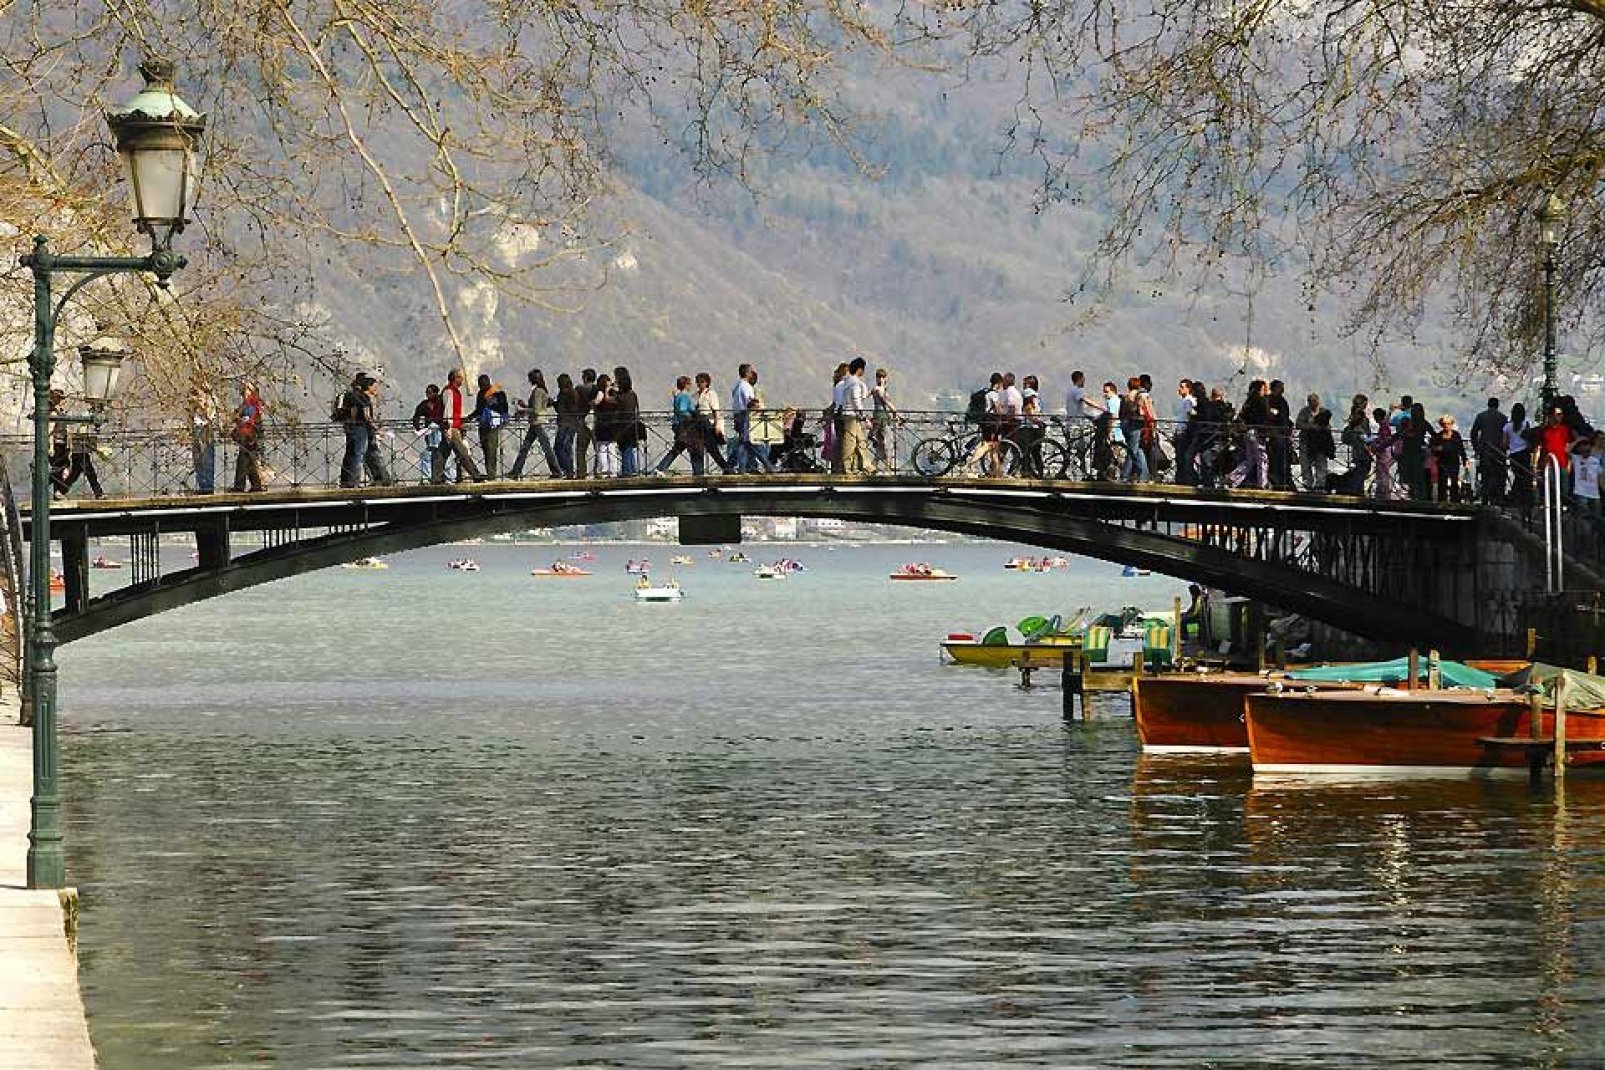 This walkway is located on the shores of Lake Annecy at the entrance to the Vassé canal. Legend has it that two lovers kissing in the middle of the bridge will be together for life.